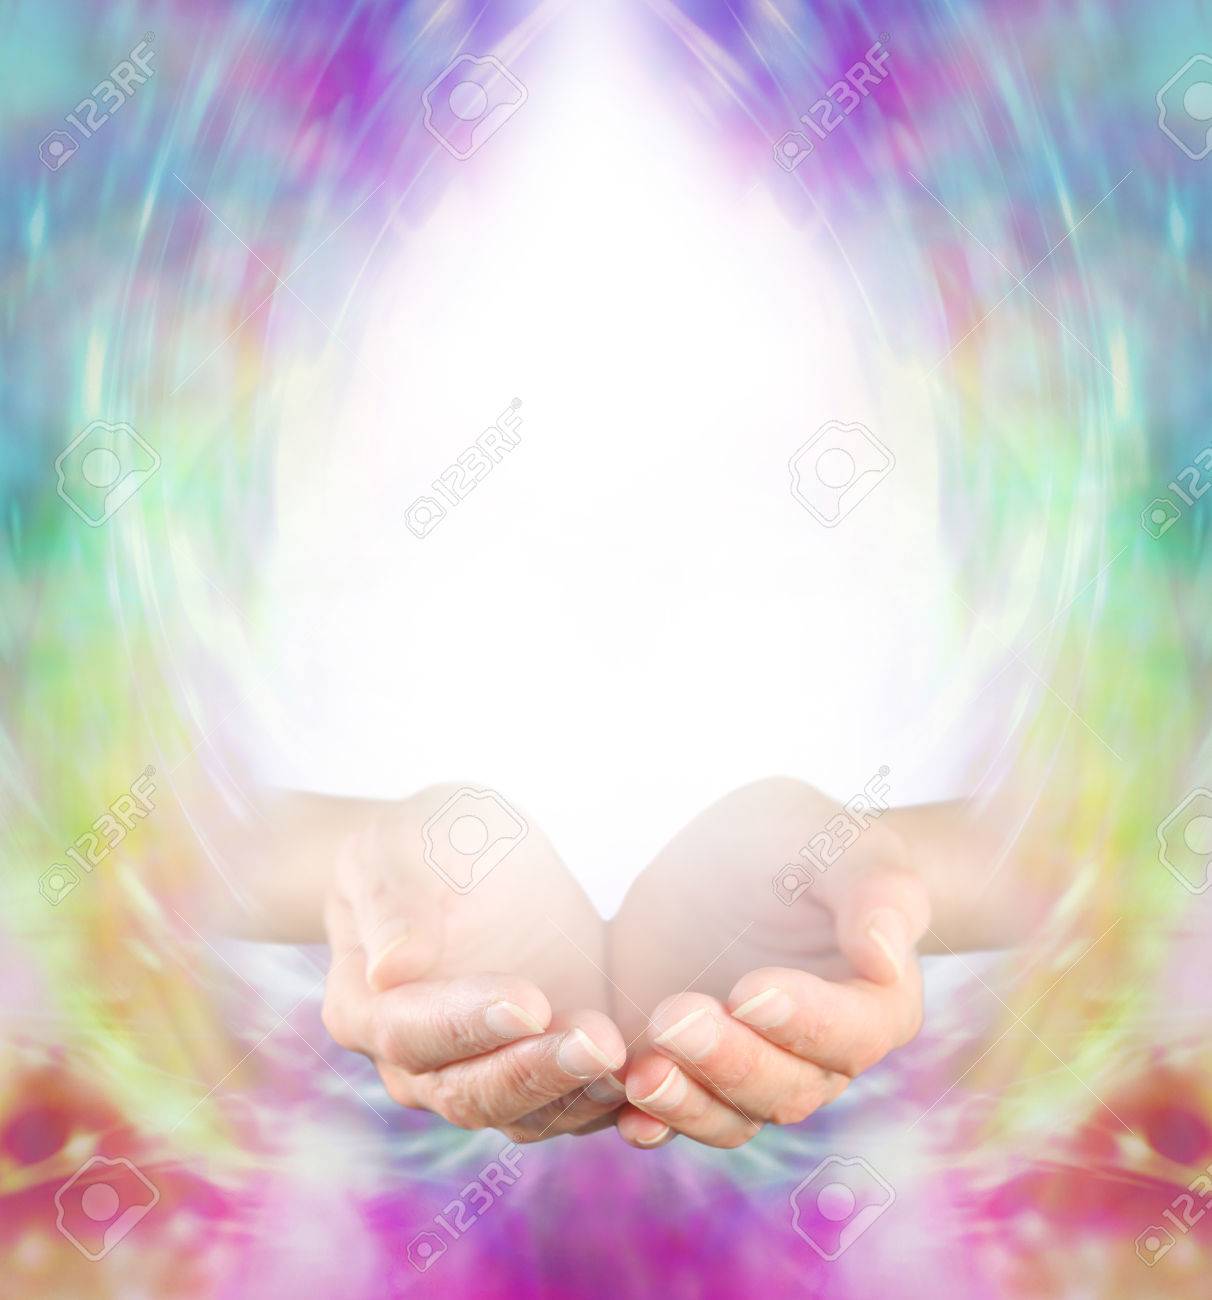 Healing Message Board Background Female Cupped Hands With White